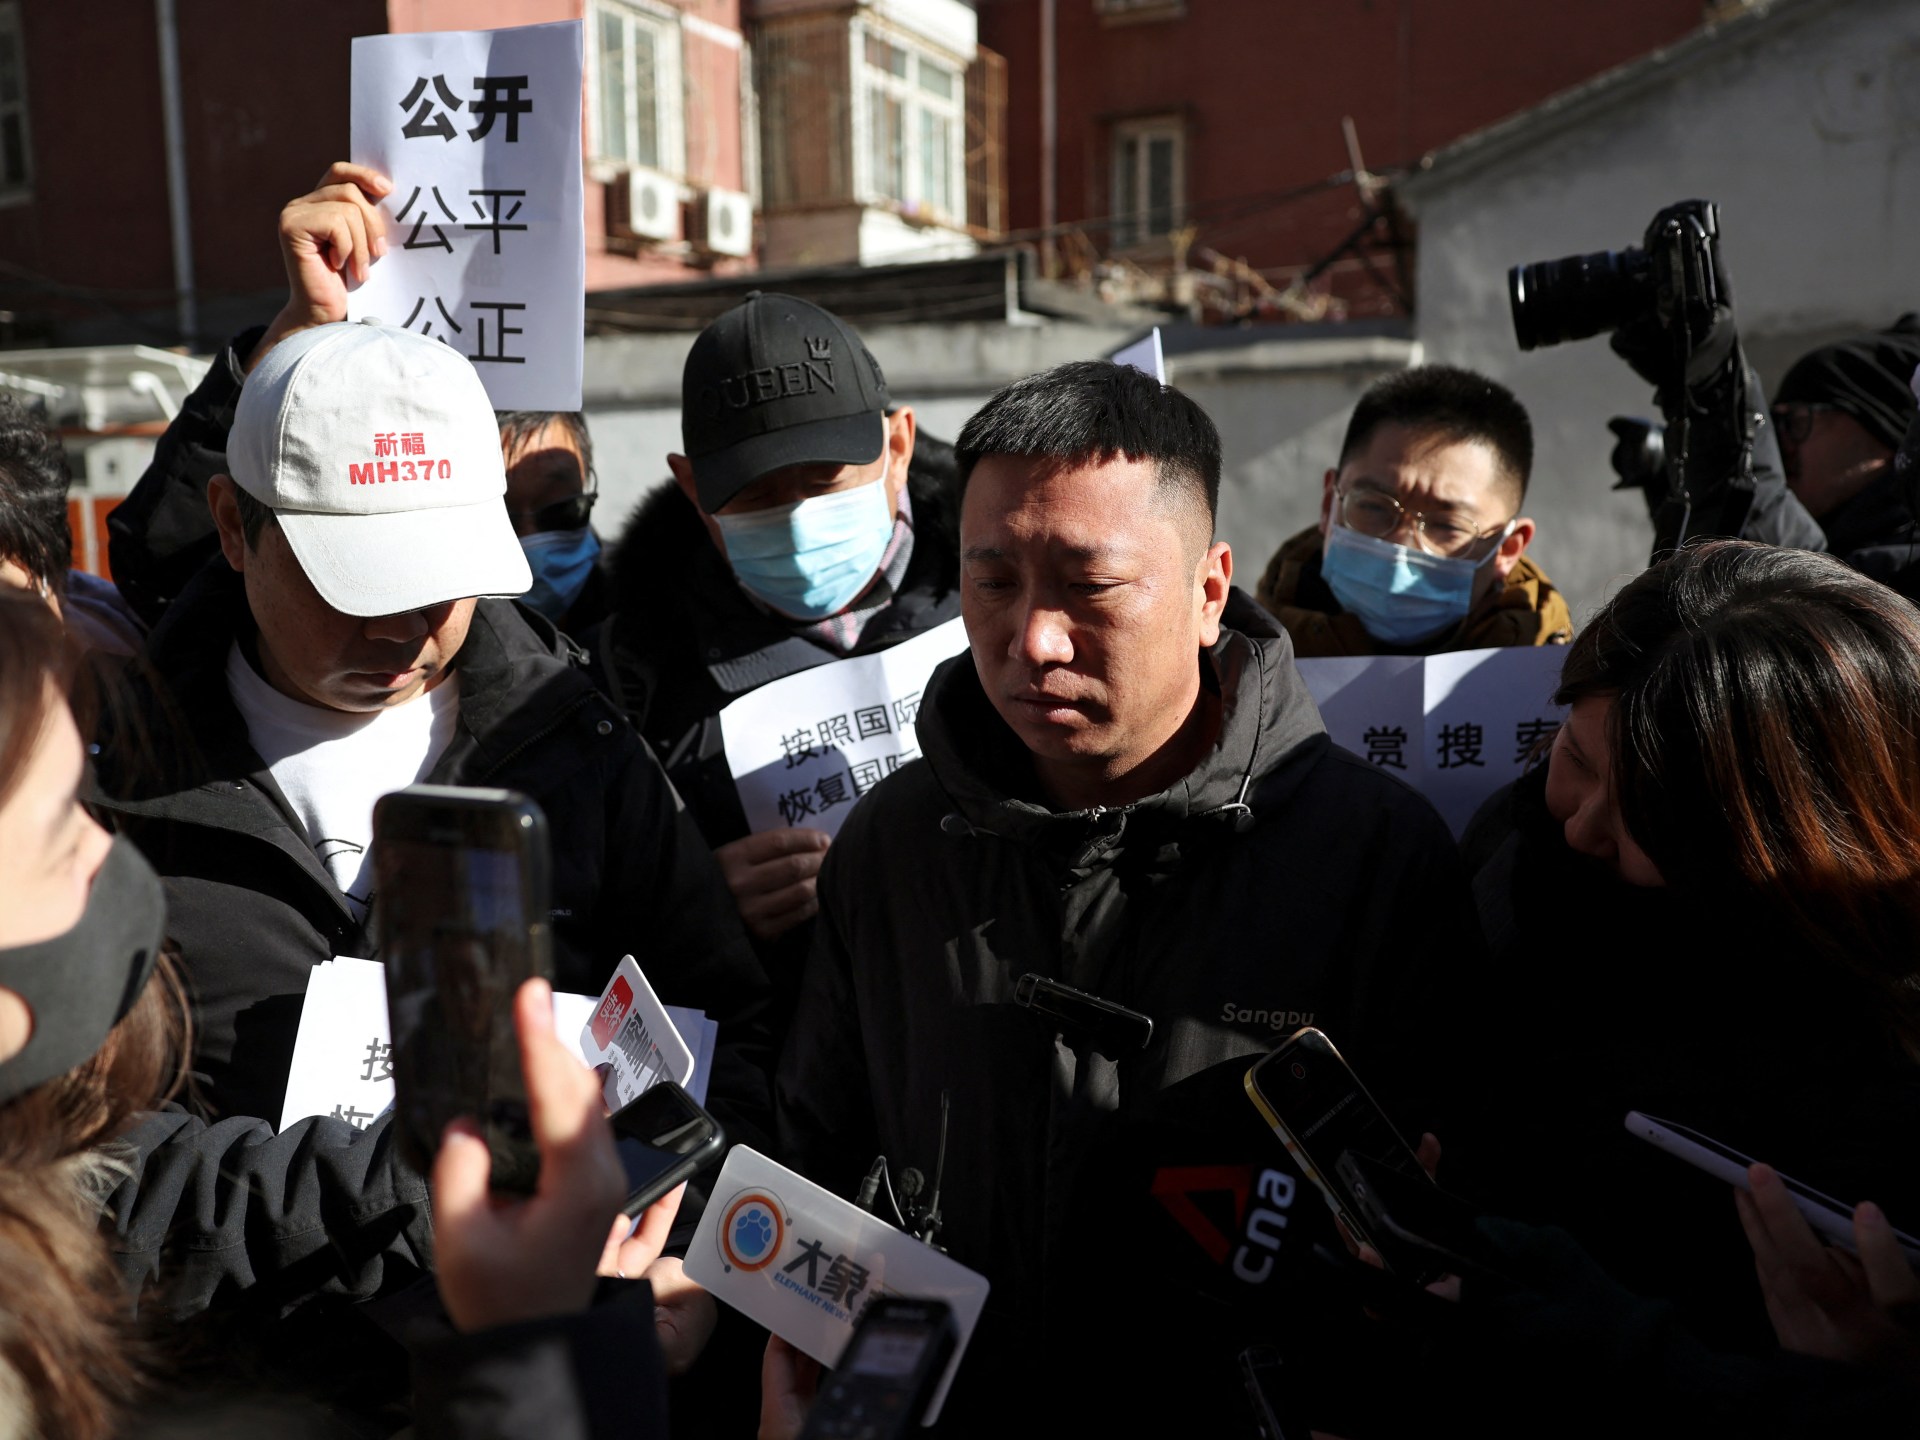 New probe over vanished Malaysia Airlines plane urged in China court | transport News #probe #vanished #Malaysia #Airlines #plane #urged #China #court #transport #News